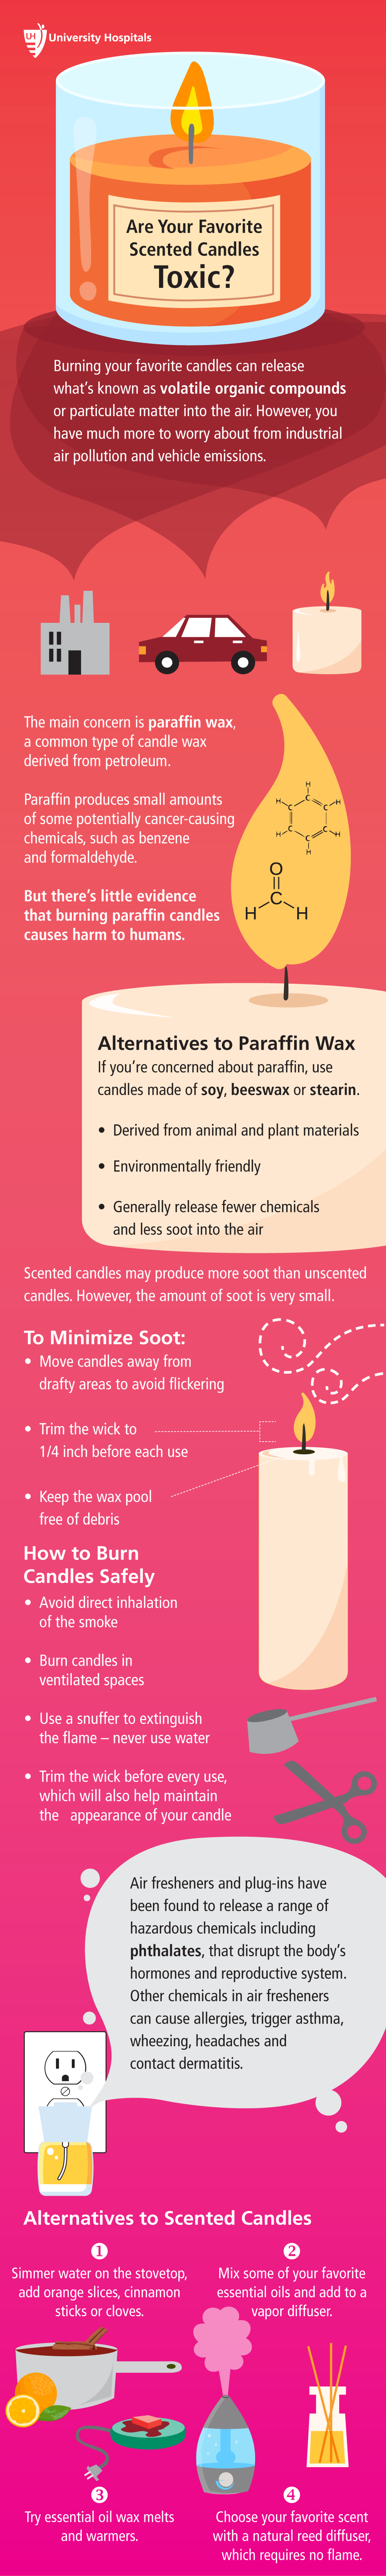 Infographic: Are Your Favorite Scented Candles Toxic?